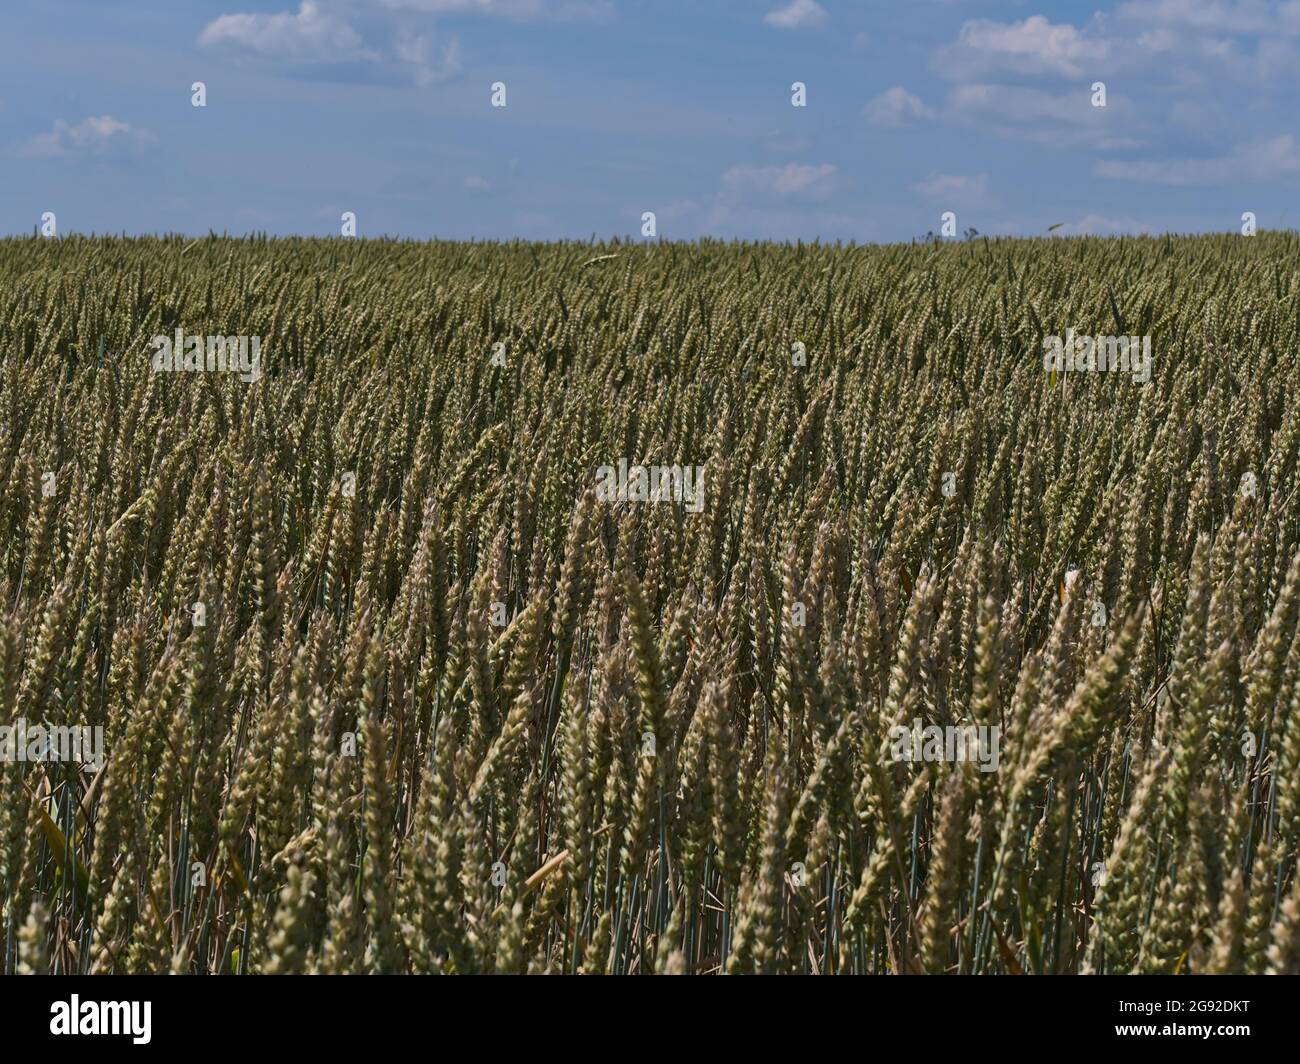 View of agricultural grain field with green and golden colored wheat plants (triticum aestivum) in summer near Abstatt, Baden-Württemberg, Germany. Stock Photo